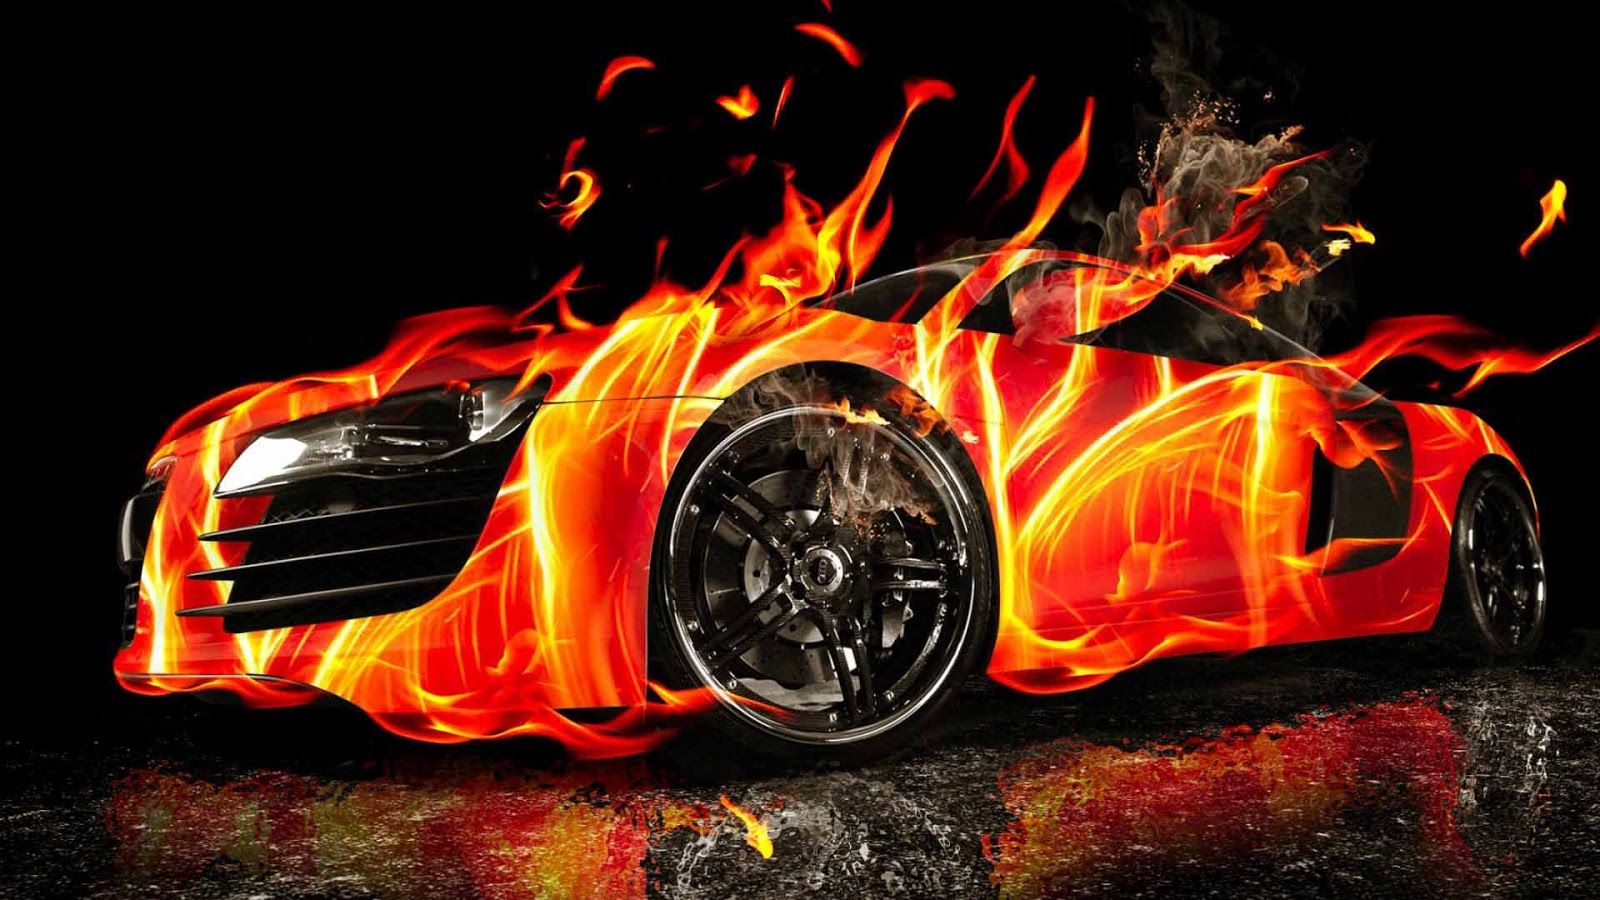 Cool Fire Background. Cool wallpaper cars, Car wallpaper, Sports car wallpaper